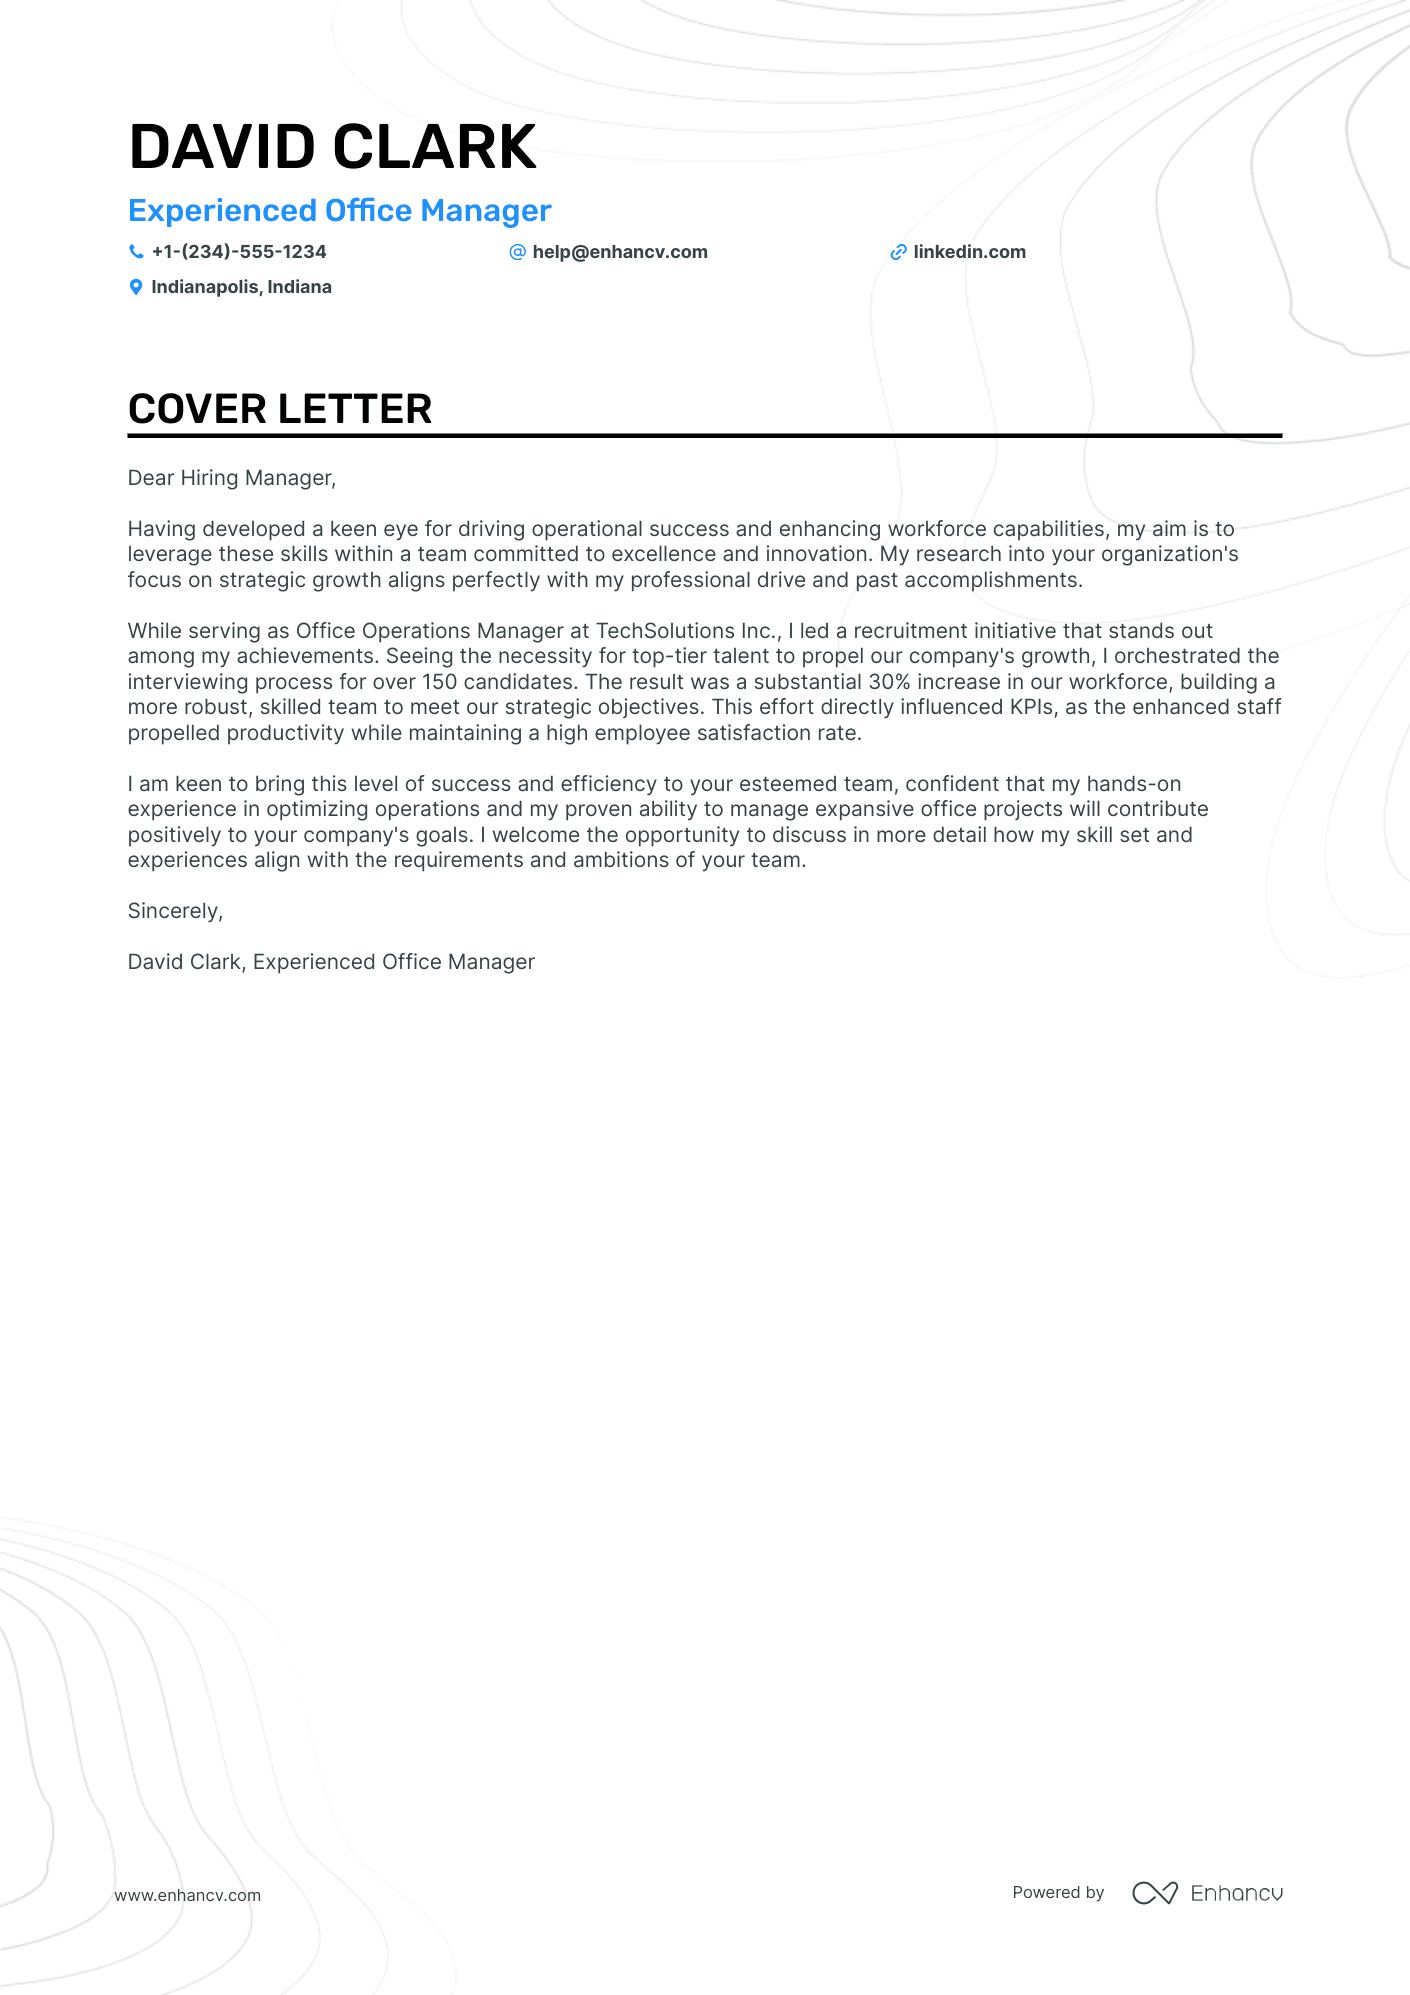 operations manager job application cover letter